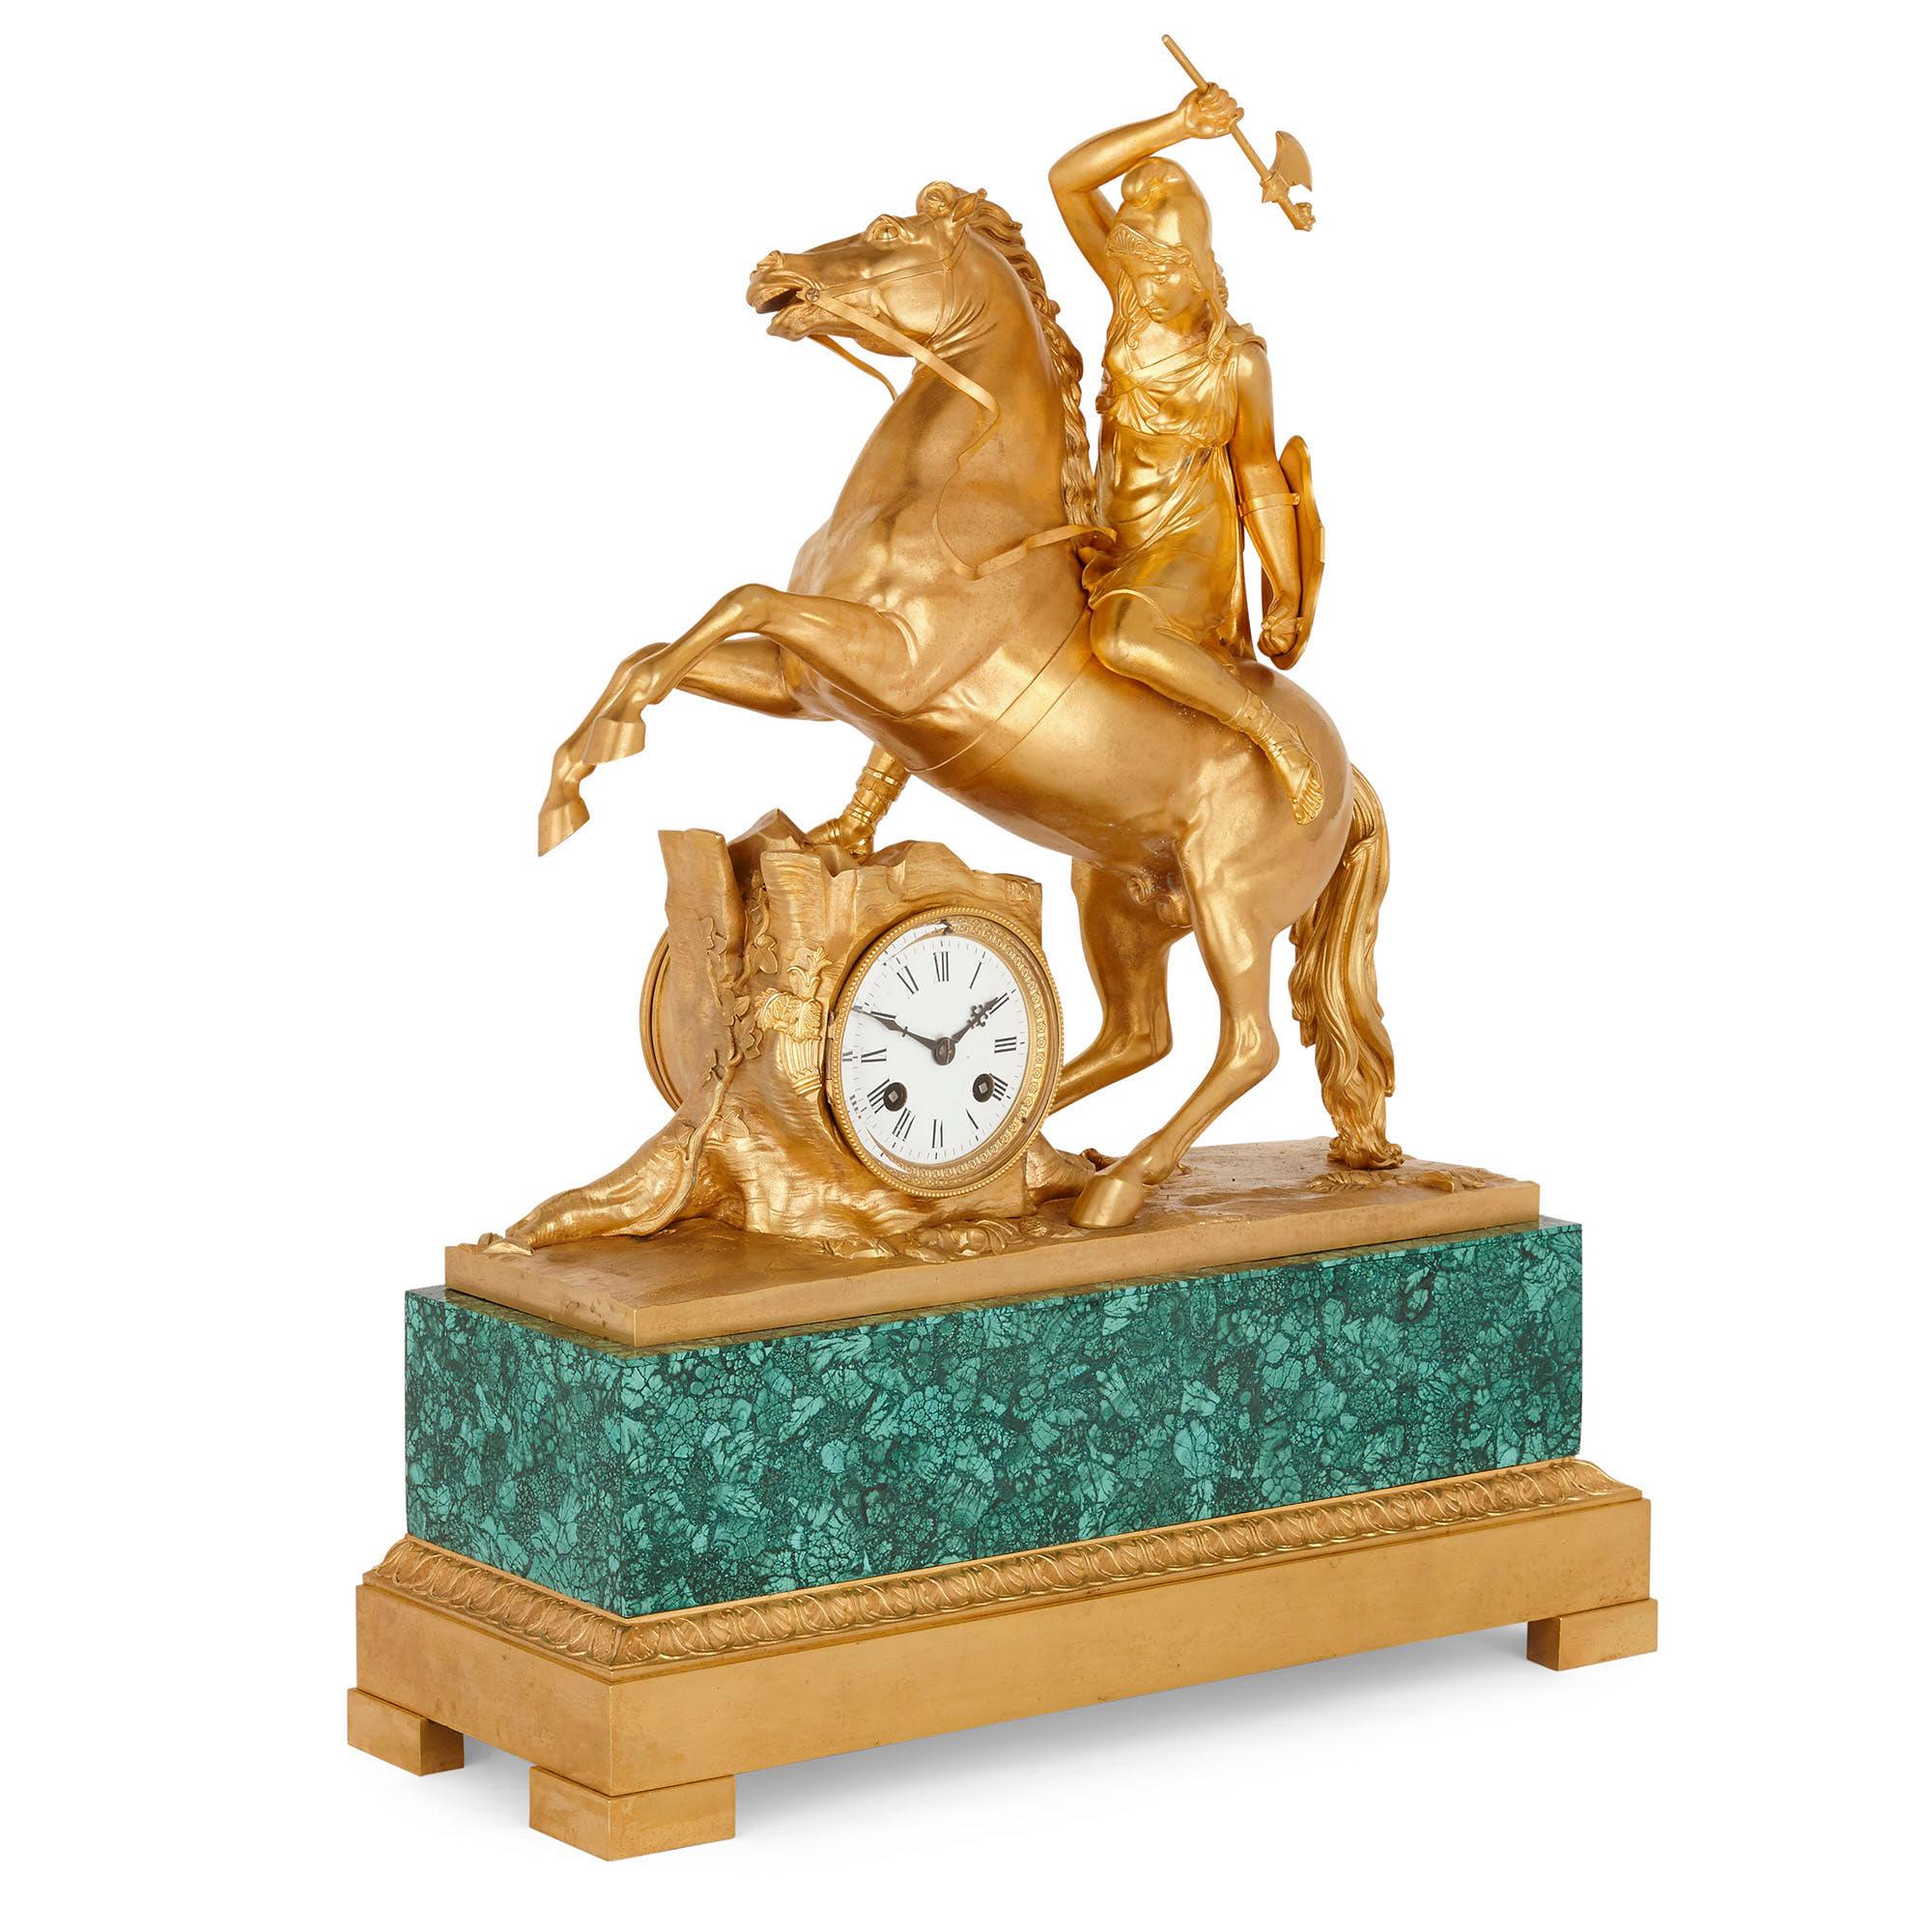 This superb gilt bronze and malachite mantel clock was created during the Charles X period, with the malachite veneer being a later addition. The clock is defined by a large sculptural group, created from gilt bronze, which portrays a classical